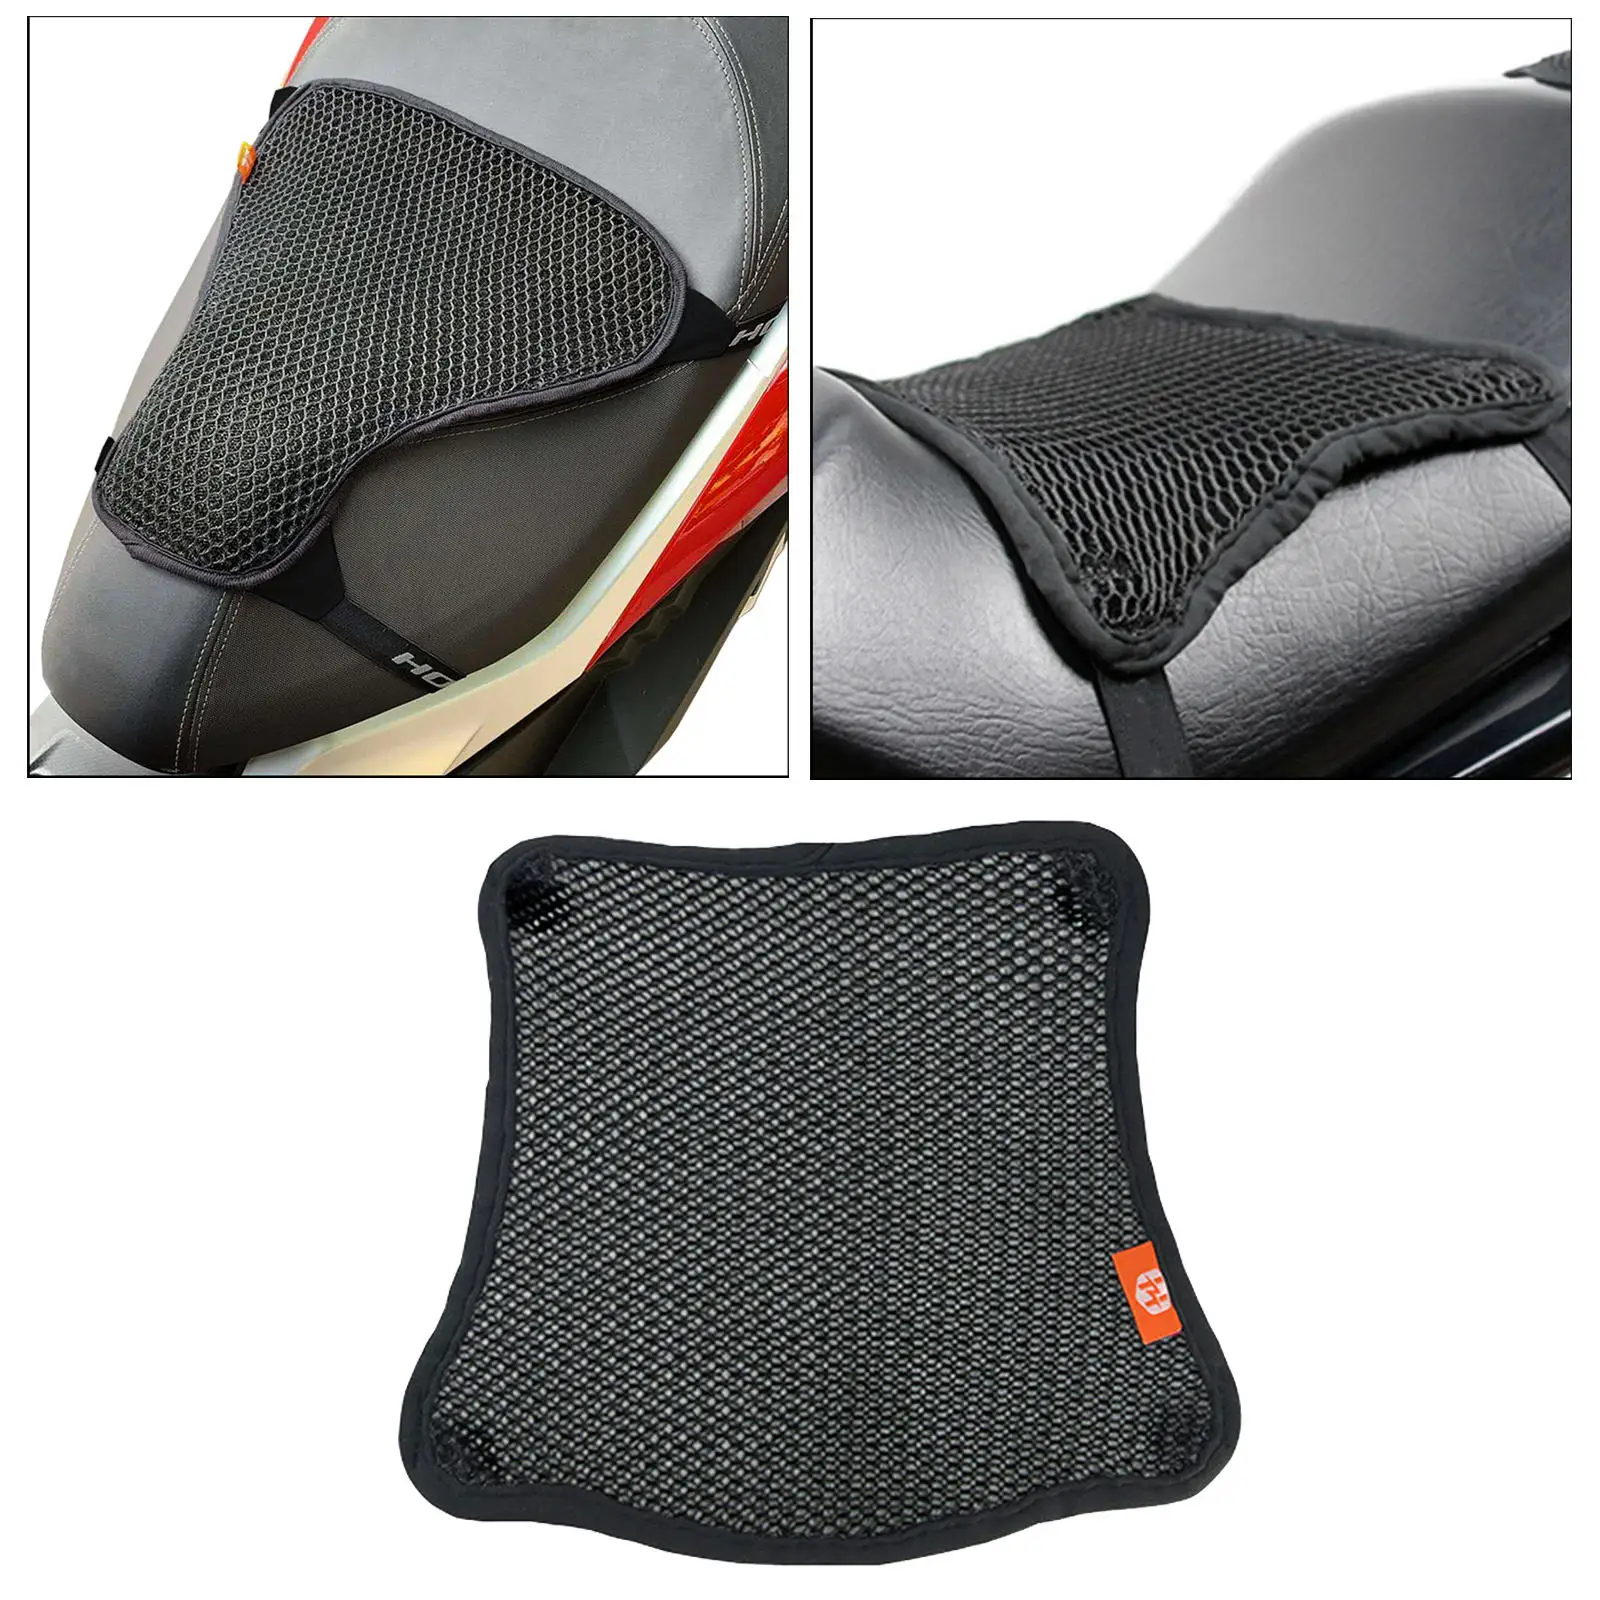 Cool Sunproof Motorcycle Seat Cushion Cover Makes Long Rides More Comfortable Cruiser Sport Saddles